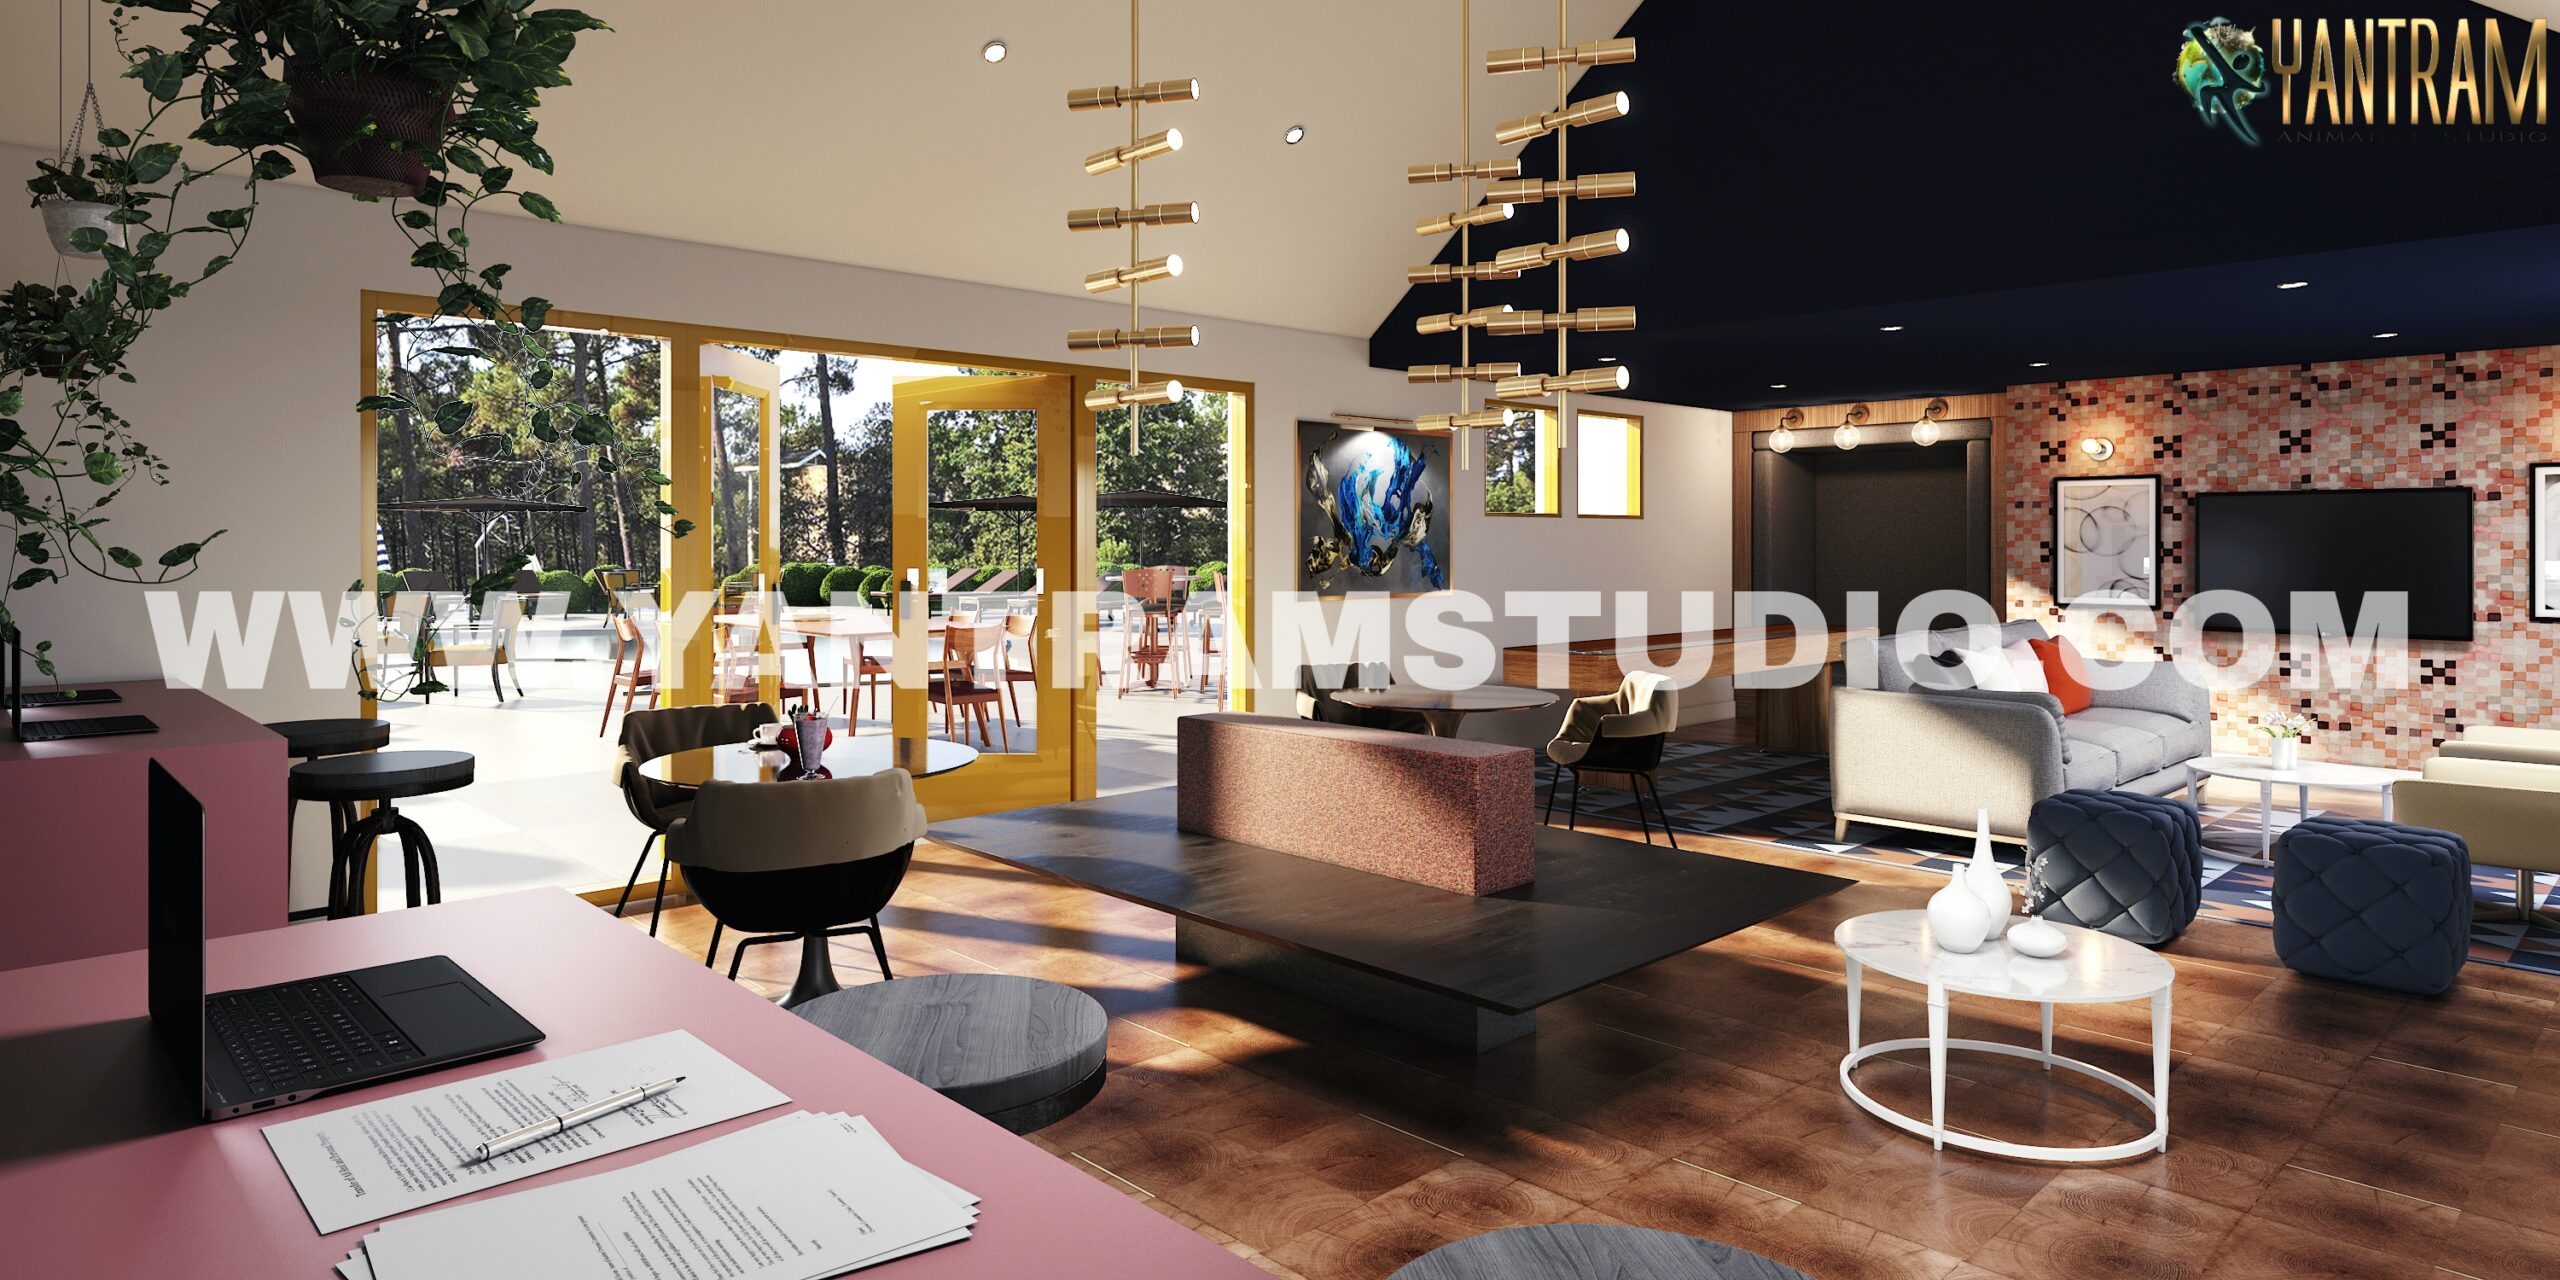 3d interior Modeling of Creative Mid-Century Club House by Yantram architectural modeling firm, Houston, Texas